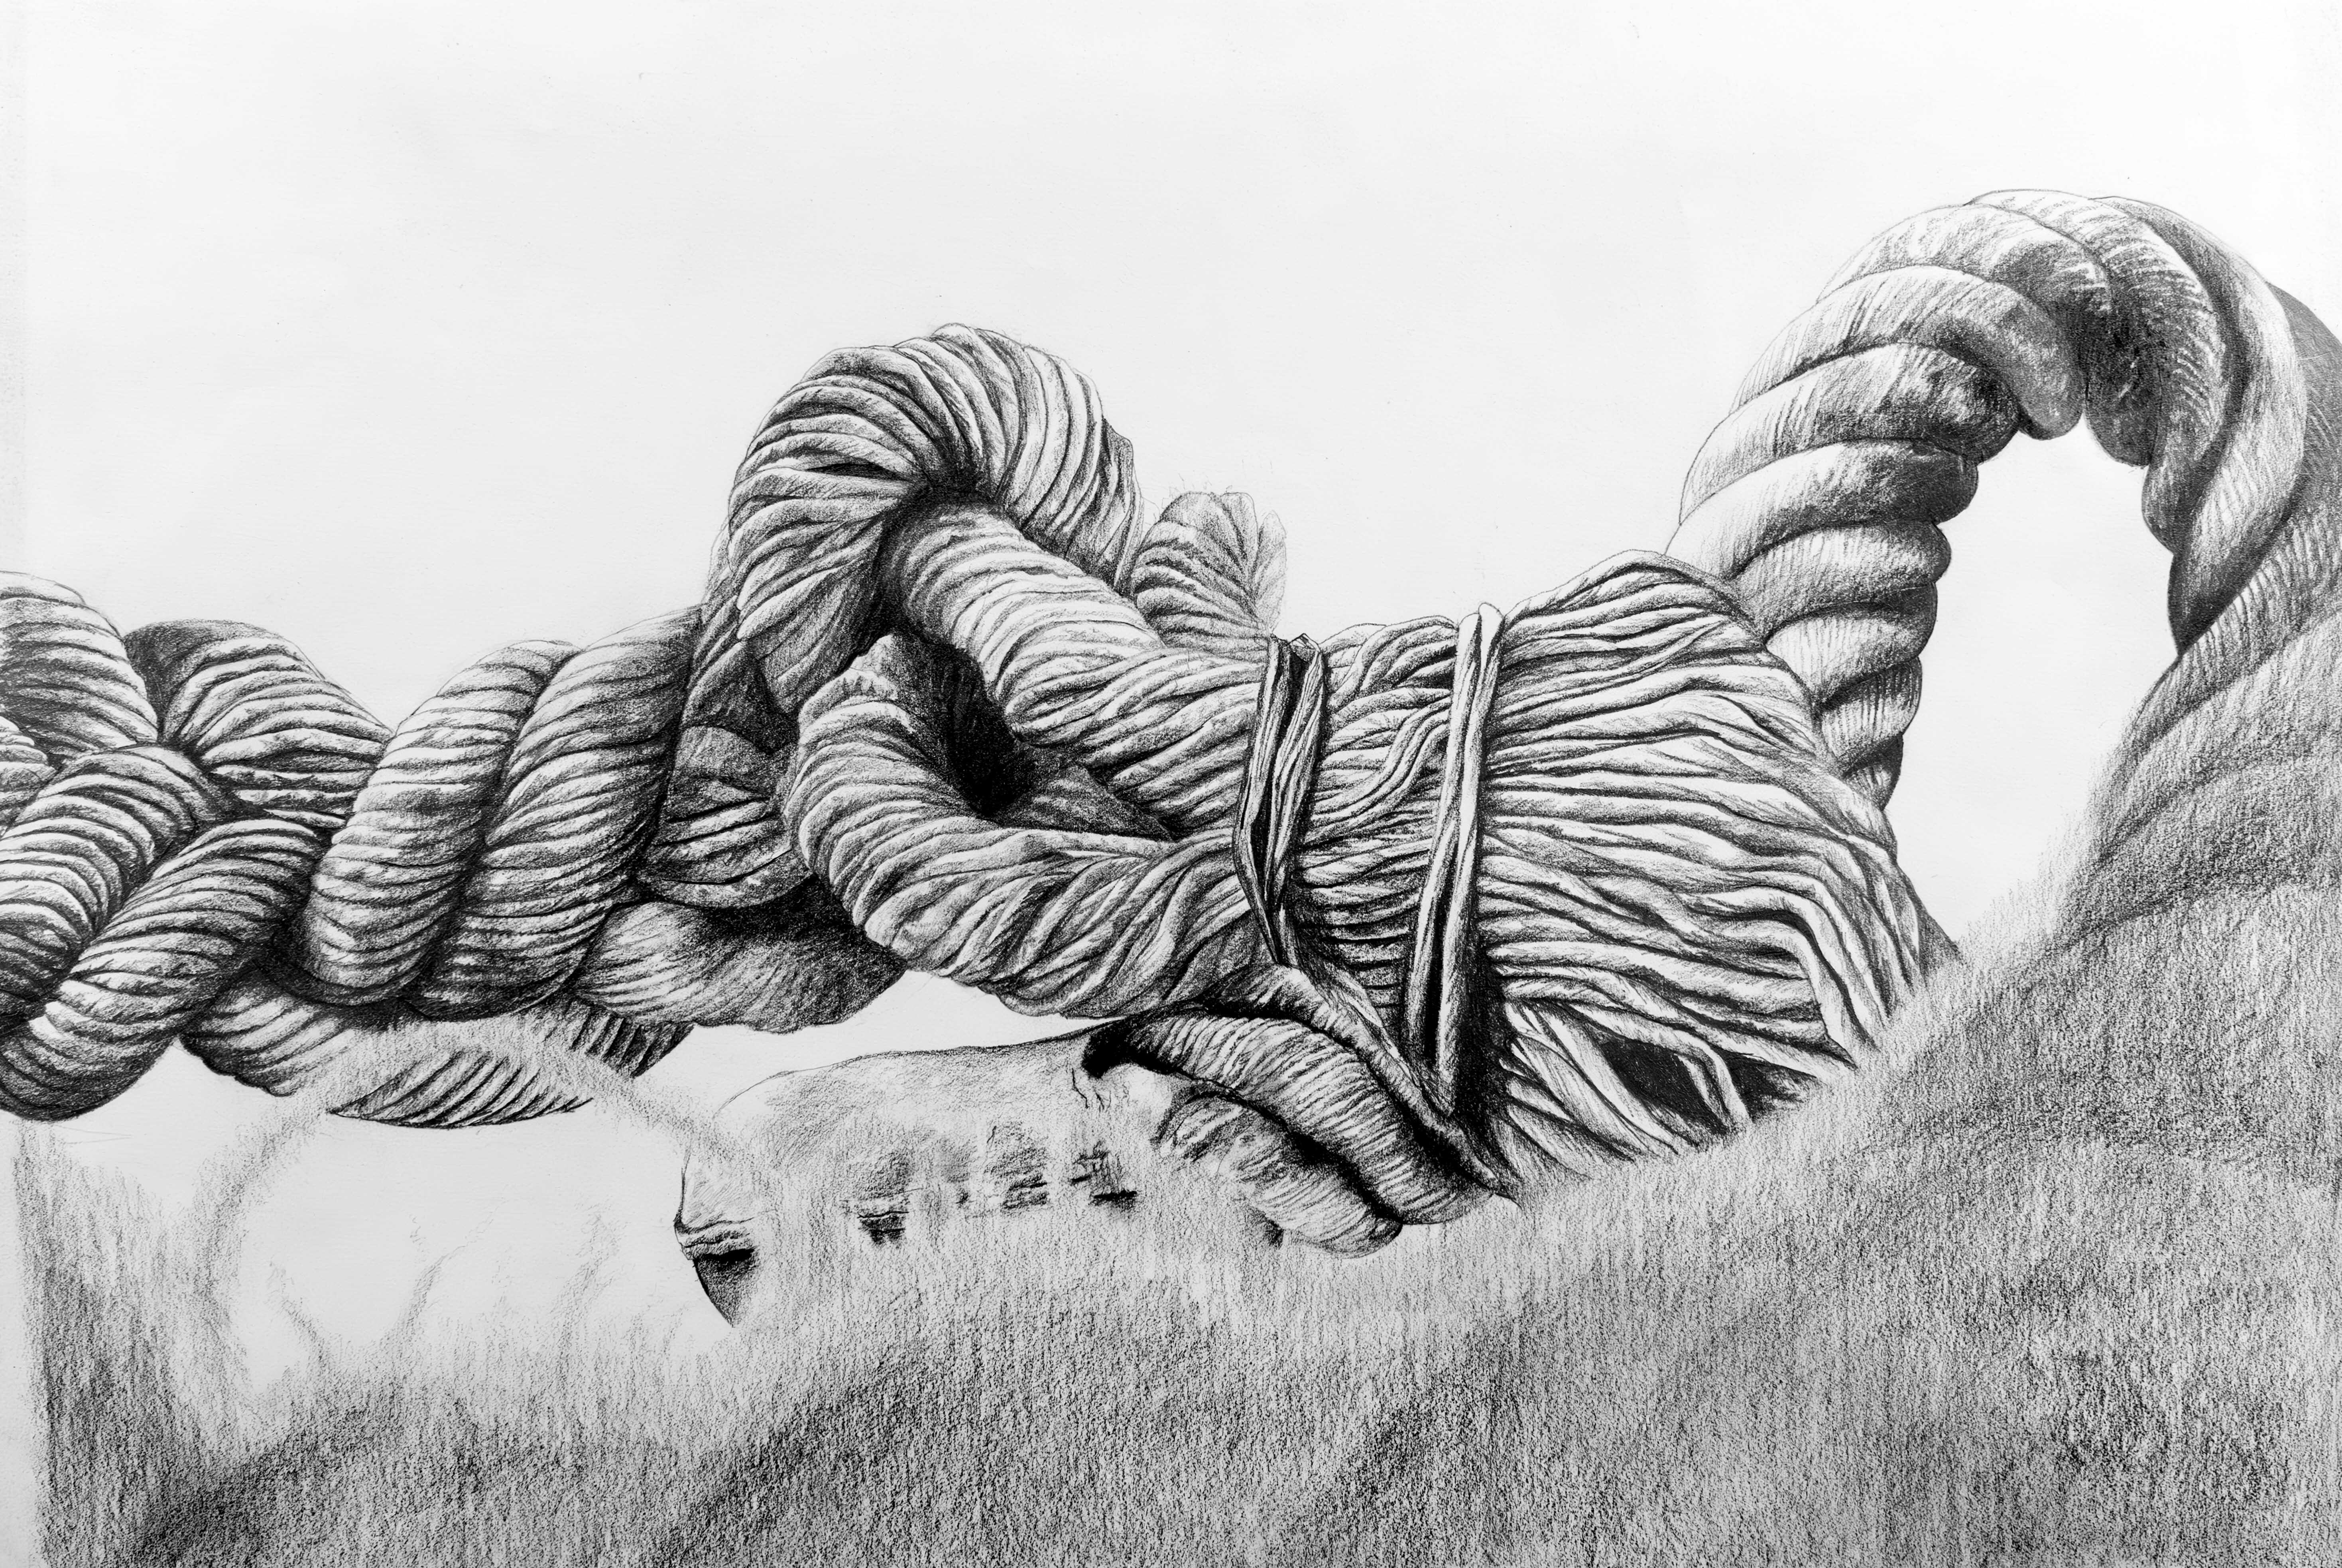 A child's pencil drawing of a rope